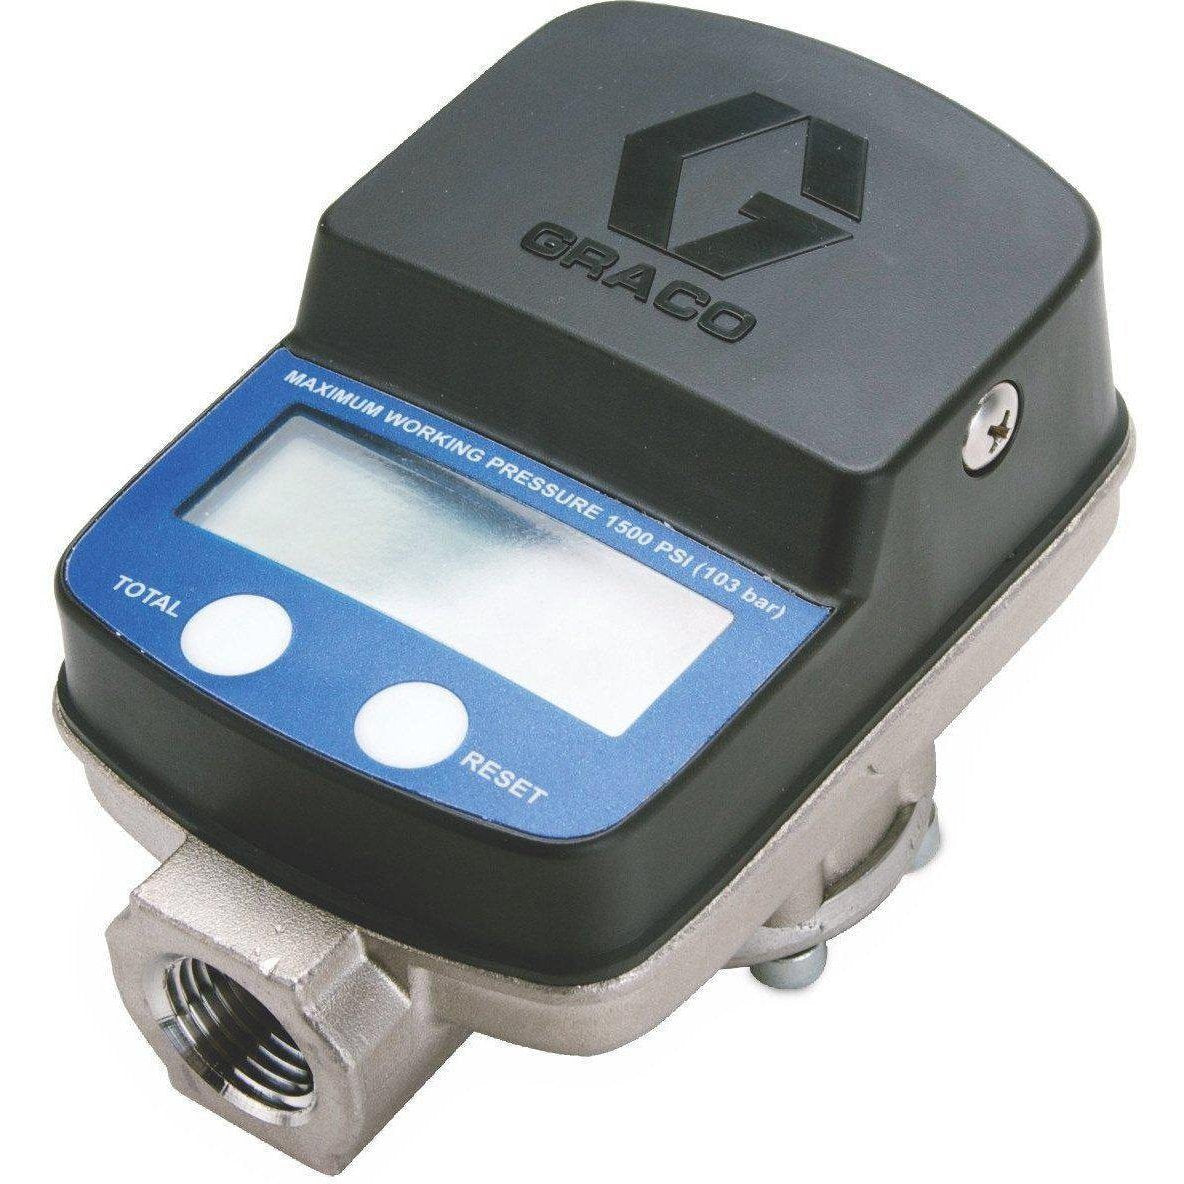 Graco 247453 Sdi15 Med/High Pressure, Med/High Flow In-Line Meter For Petroleum- And Synthetic-Based Oils, Anti-Freeze, Windshield Washer Fluid - Fireball Equipment Ltd.